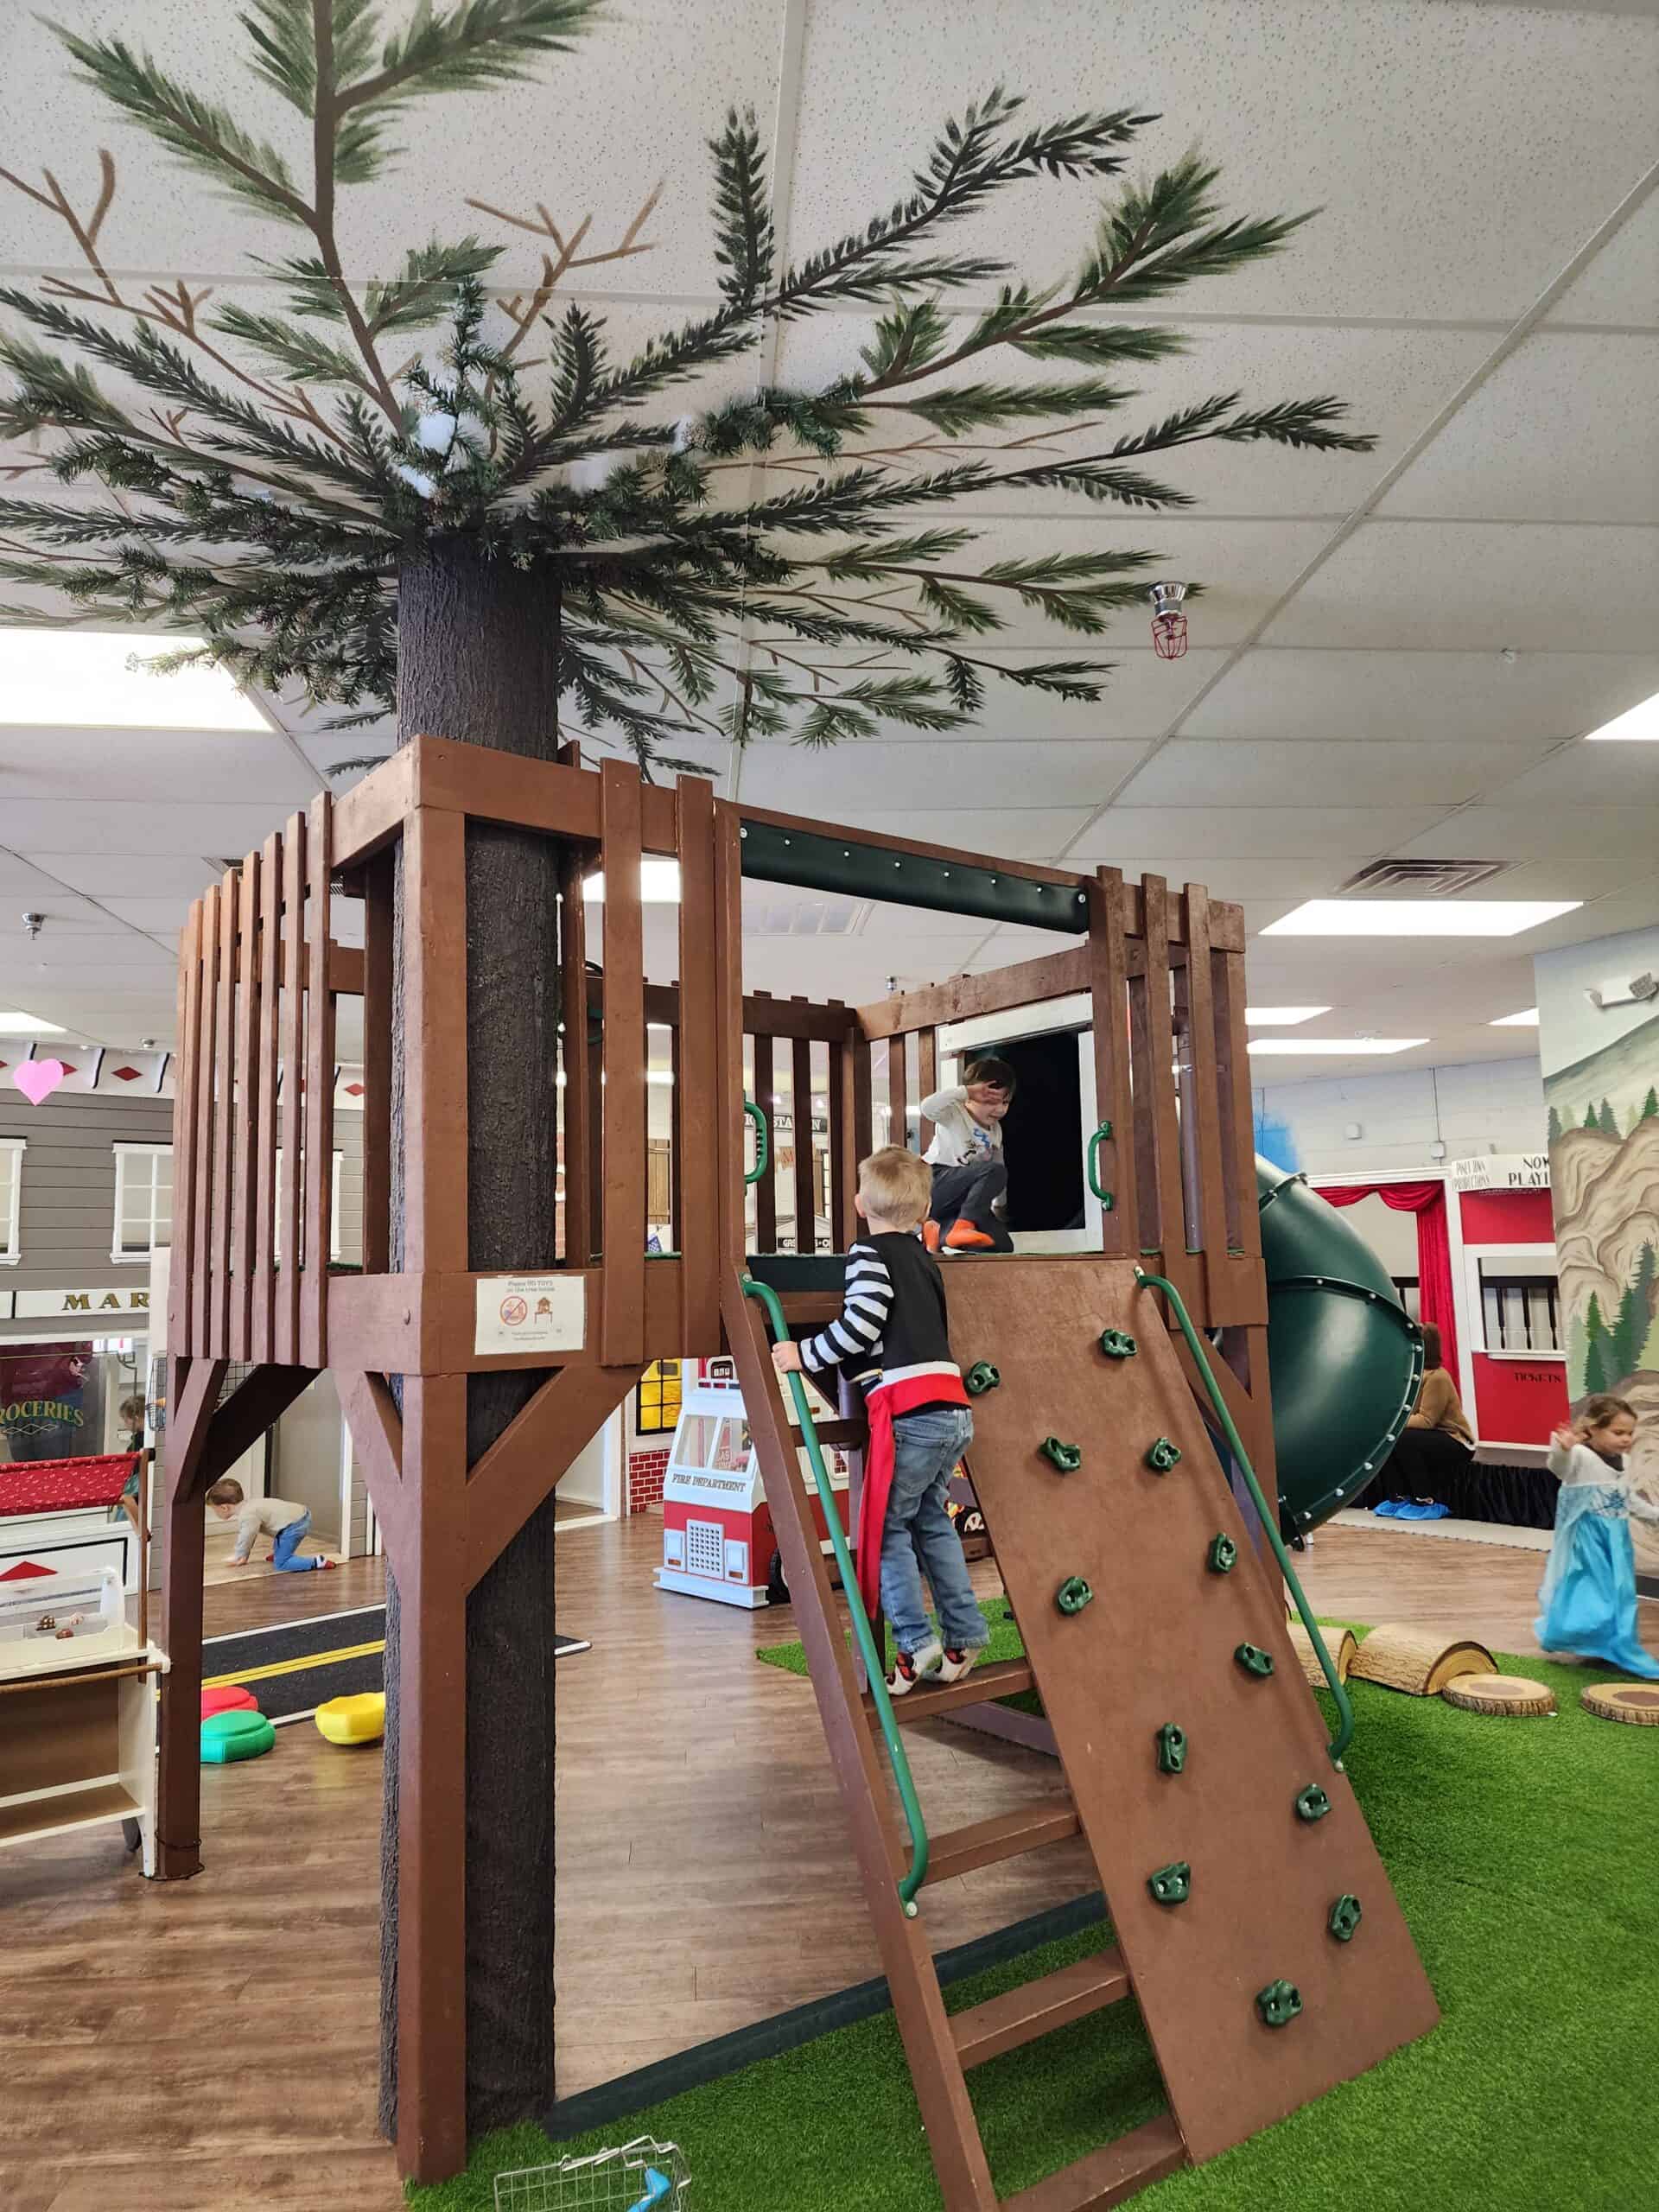 Children play on a wooden climbing structure with a rock wall and a slide, designed to resemble a treehouse, at Piney Town Playhouse in Fuquay-Varina, NC. The indoor play area also features artificial turf and a backdrop of colorful, kid-sized storefronts.